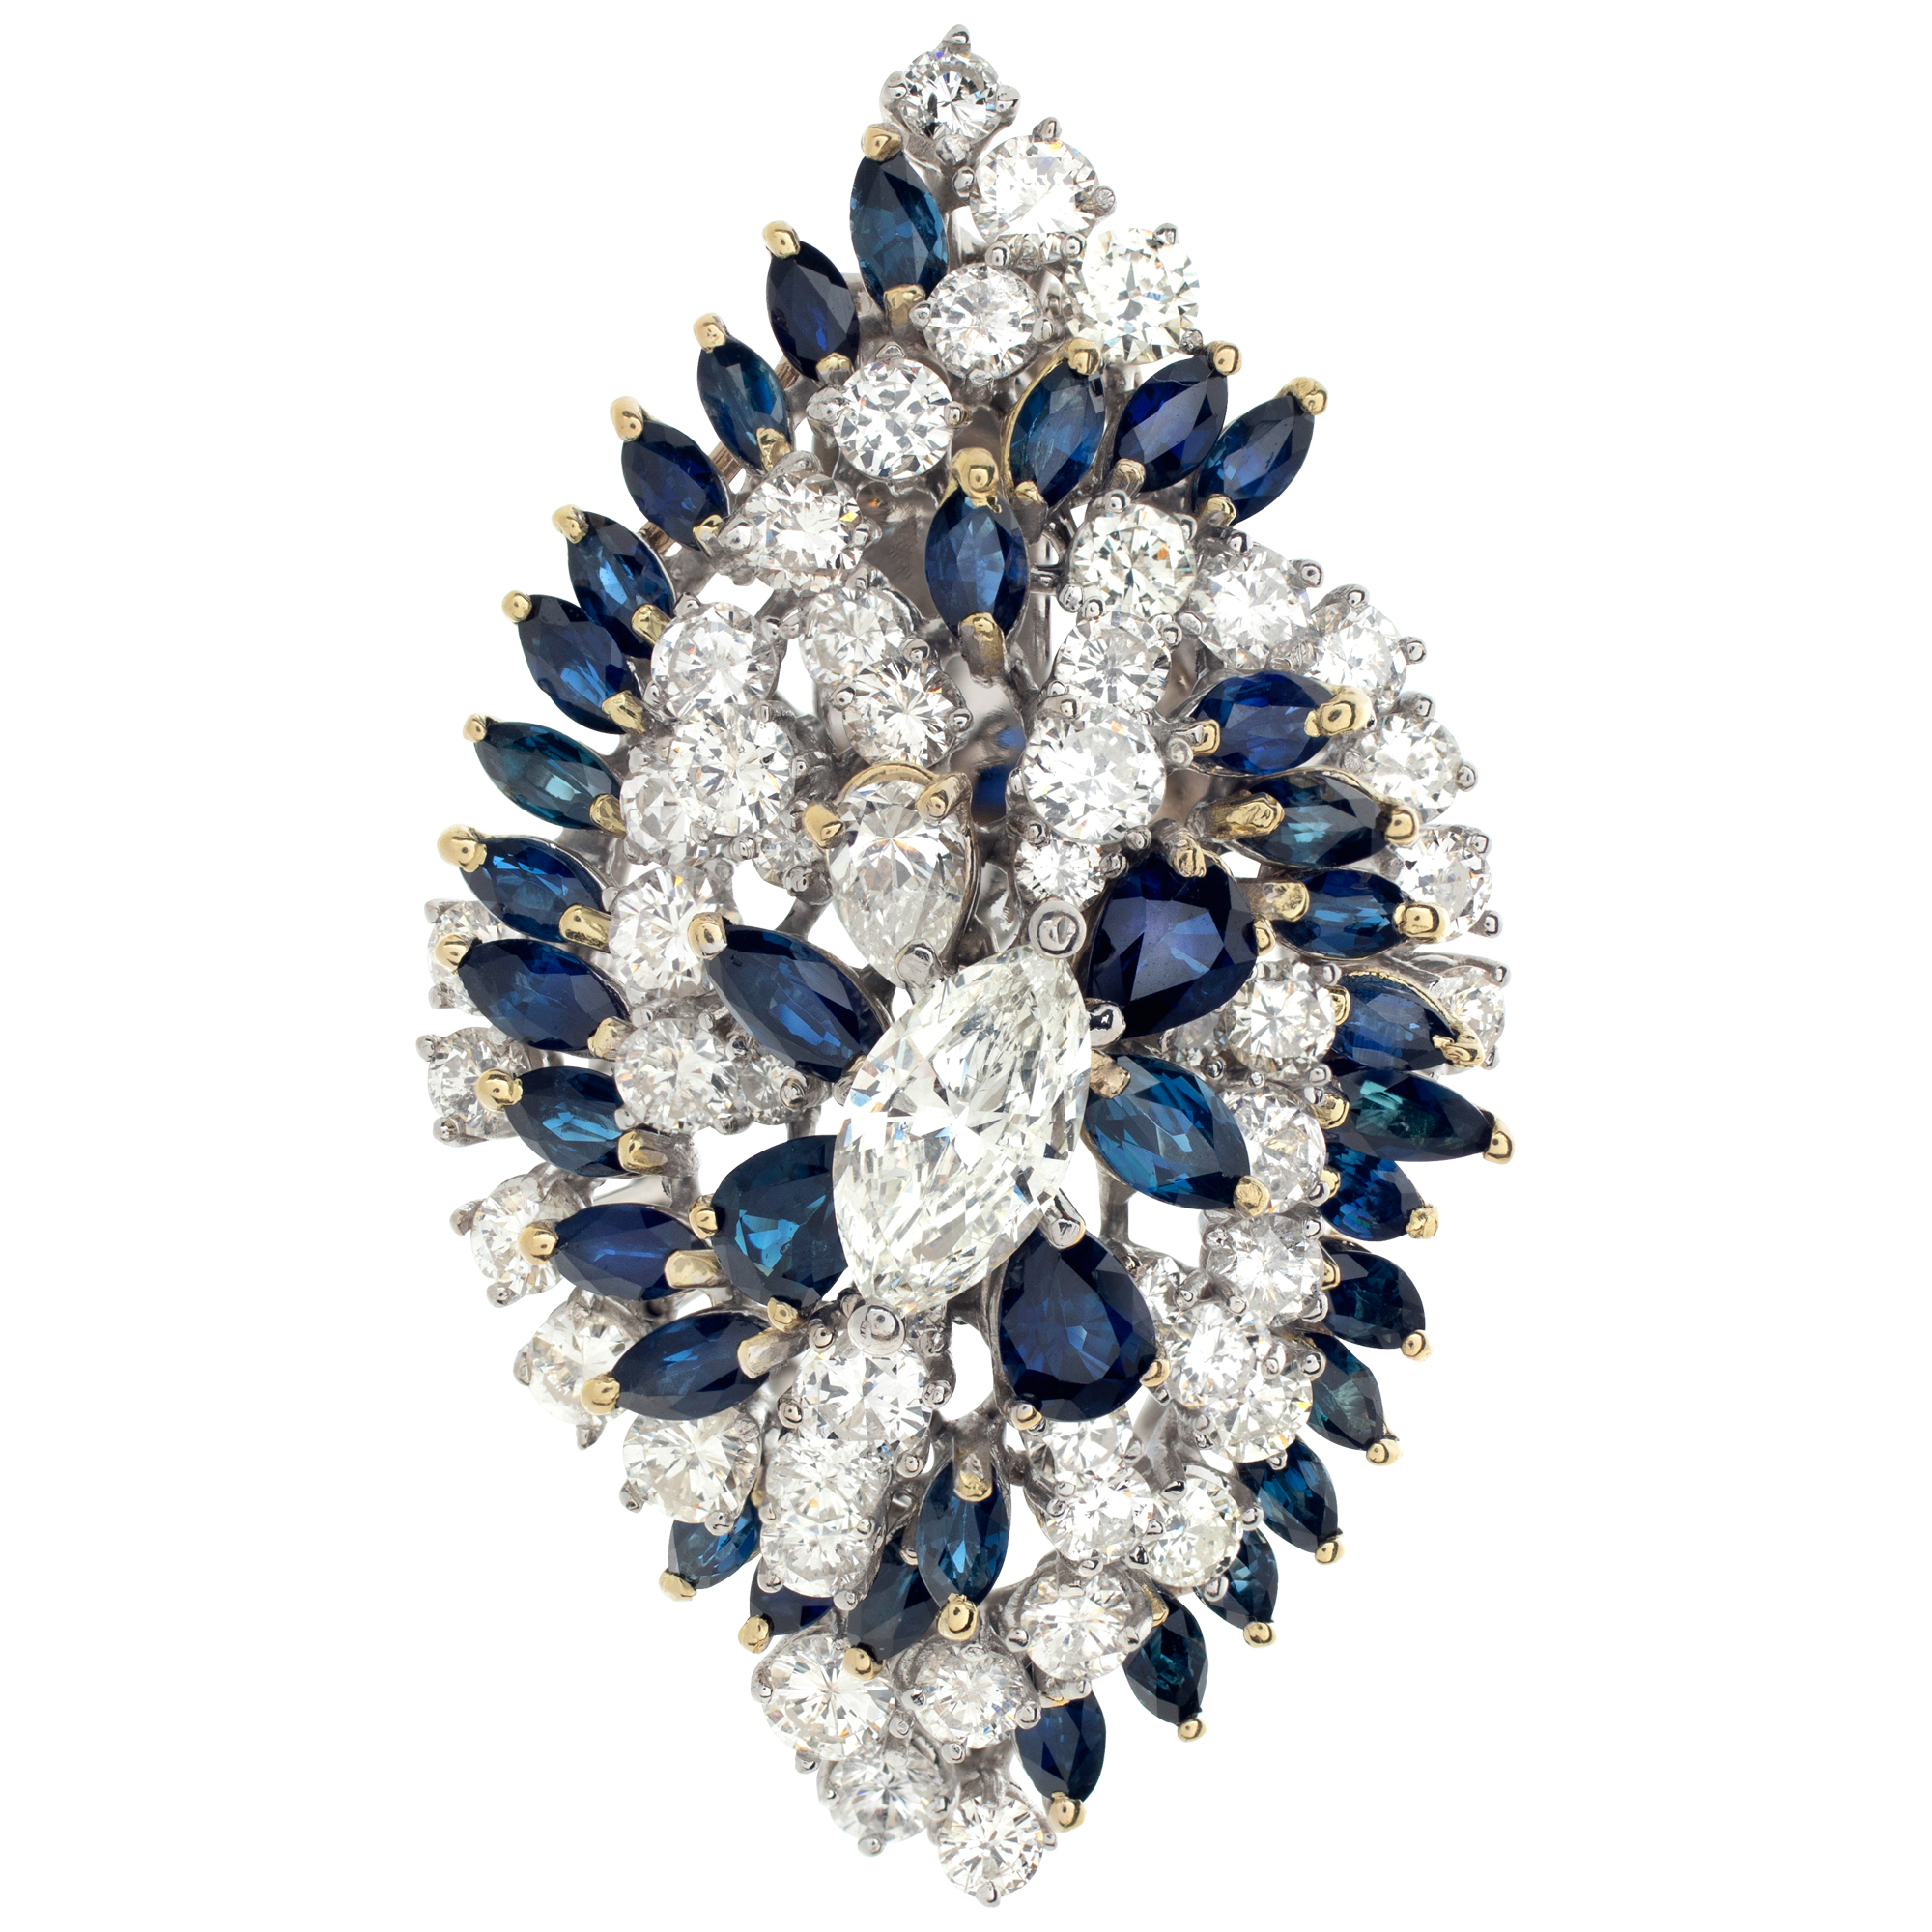 Vintage Diamonds And Sapphires Enhancer, With Over 4.50 Carats Marquise, Round And Pear Brilliant Cut Diamonds, Set In 18k White Gold. Gia Certified Center Brilliant Marquise Cut Diamond 0.91 Carat-